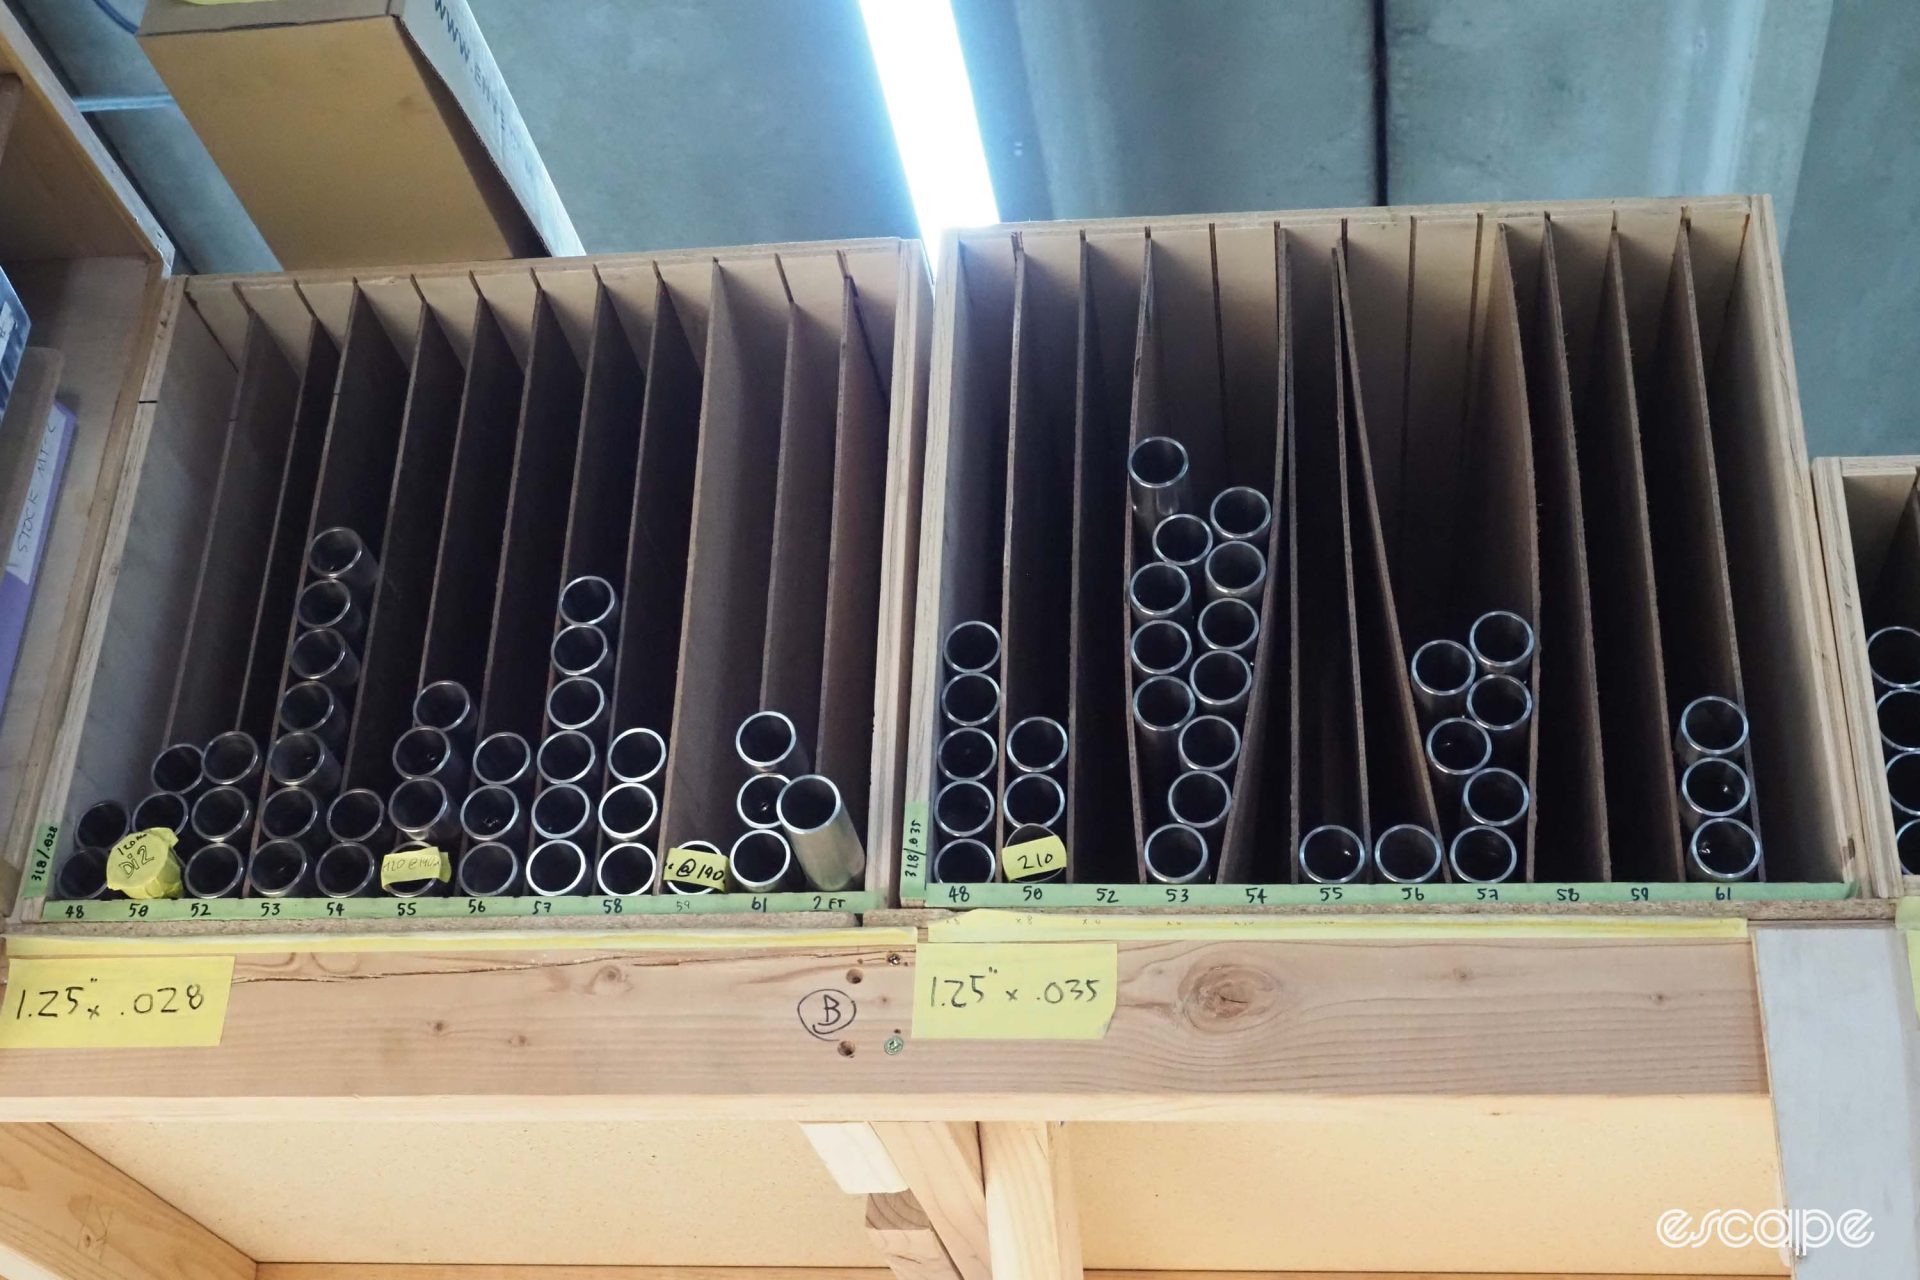 A stack of main tubes sits divided by cardboard spacers.